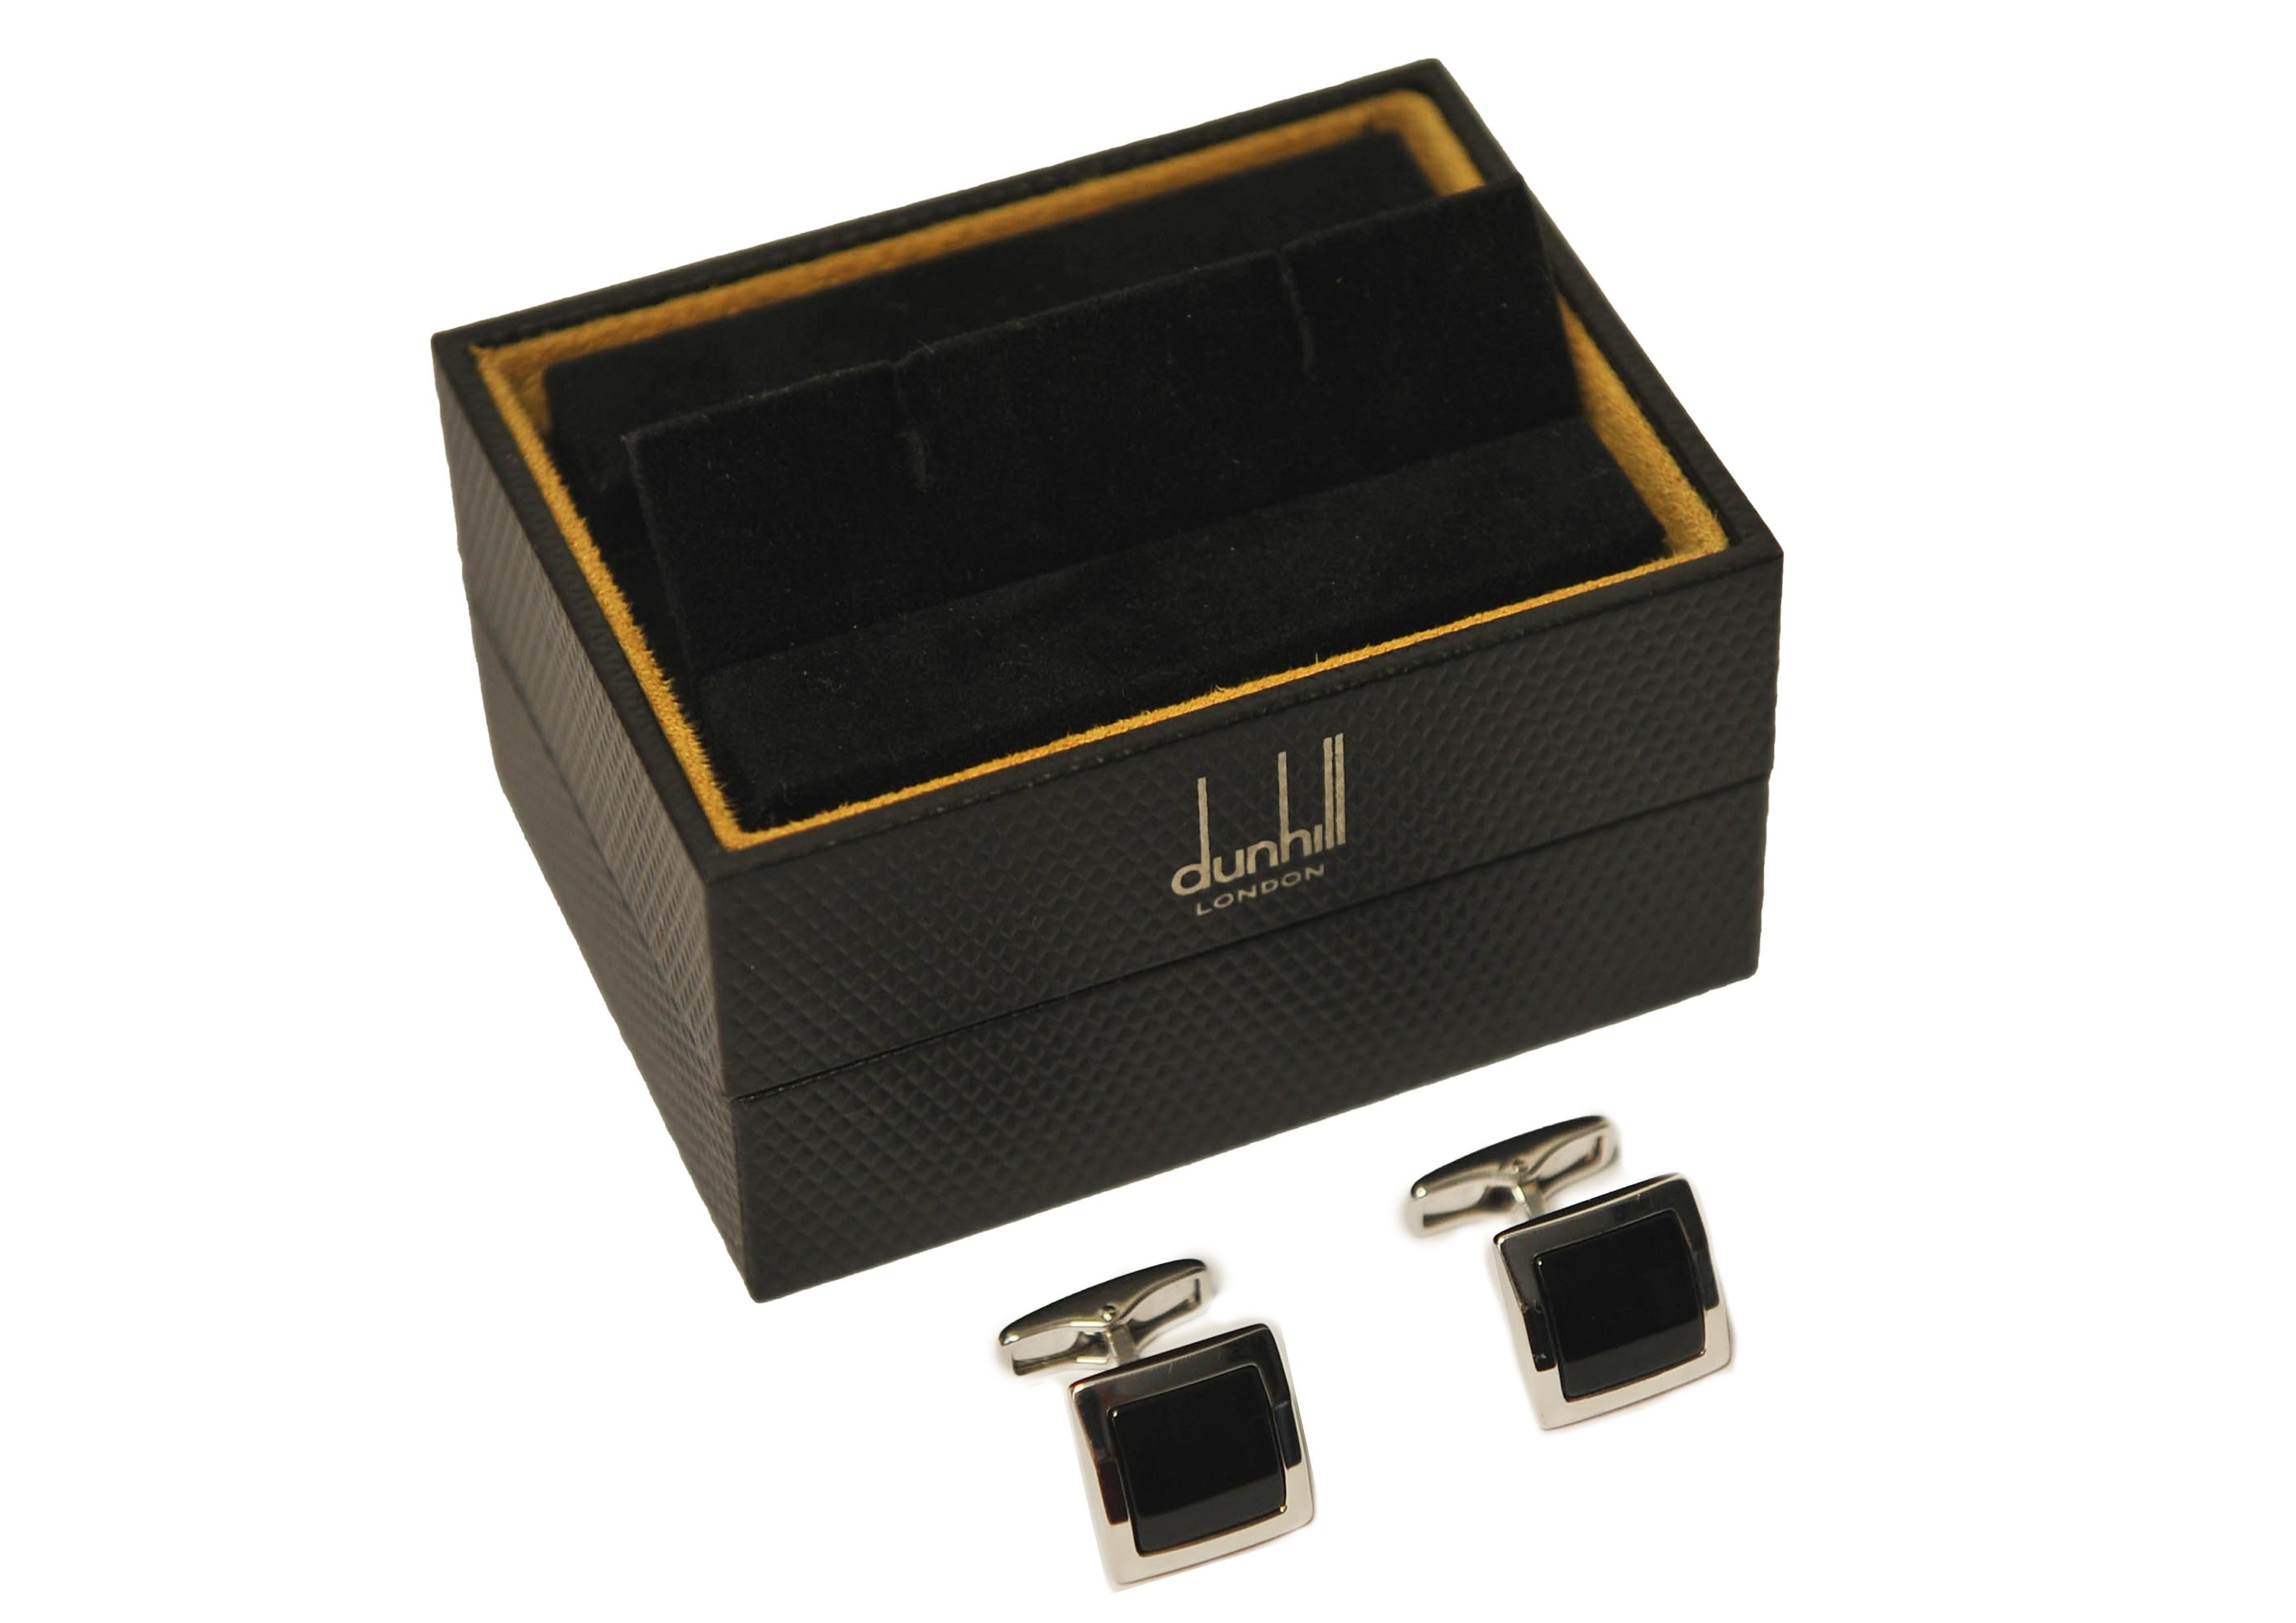 Dunhill of London Sterling Silver & Onyx Cufflinks in Original Dunhill Box  In Good Condition For Sale In High Wycombe, GB